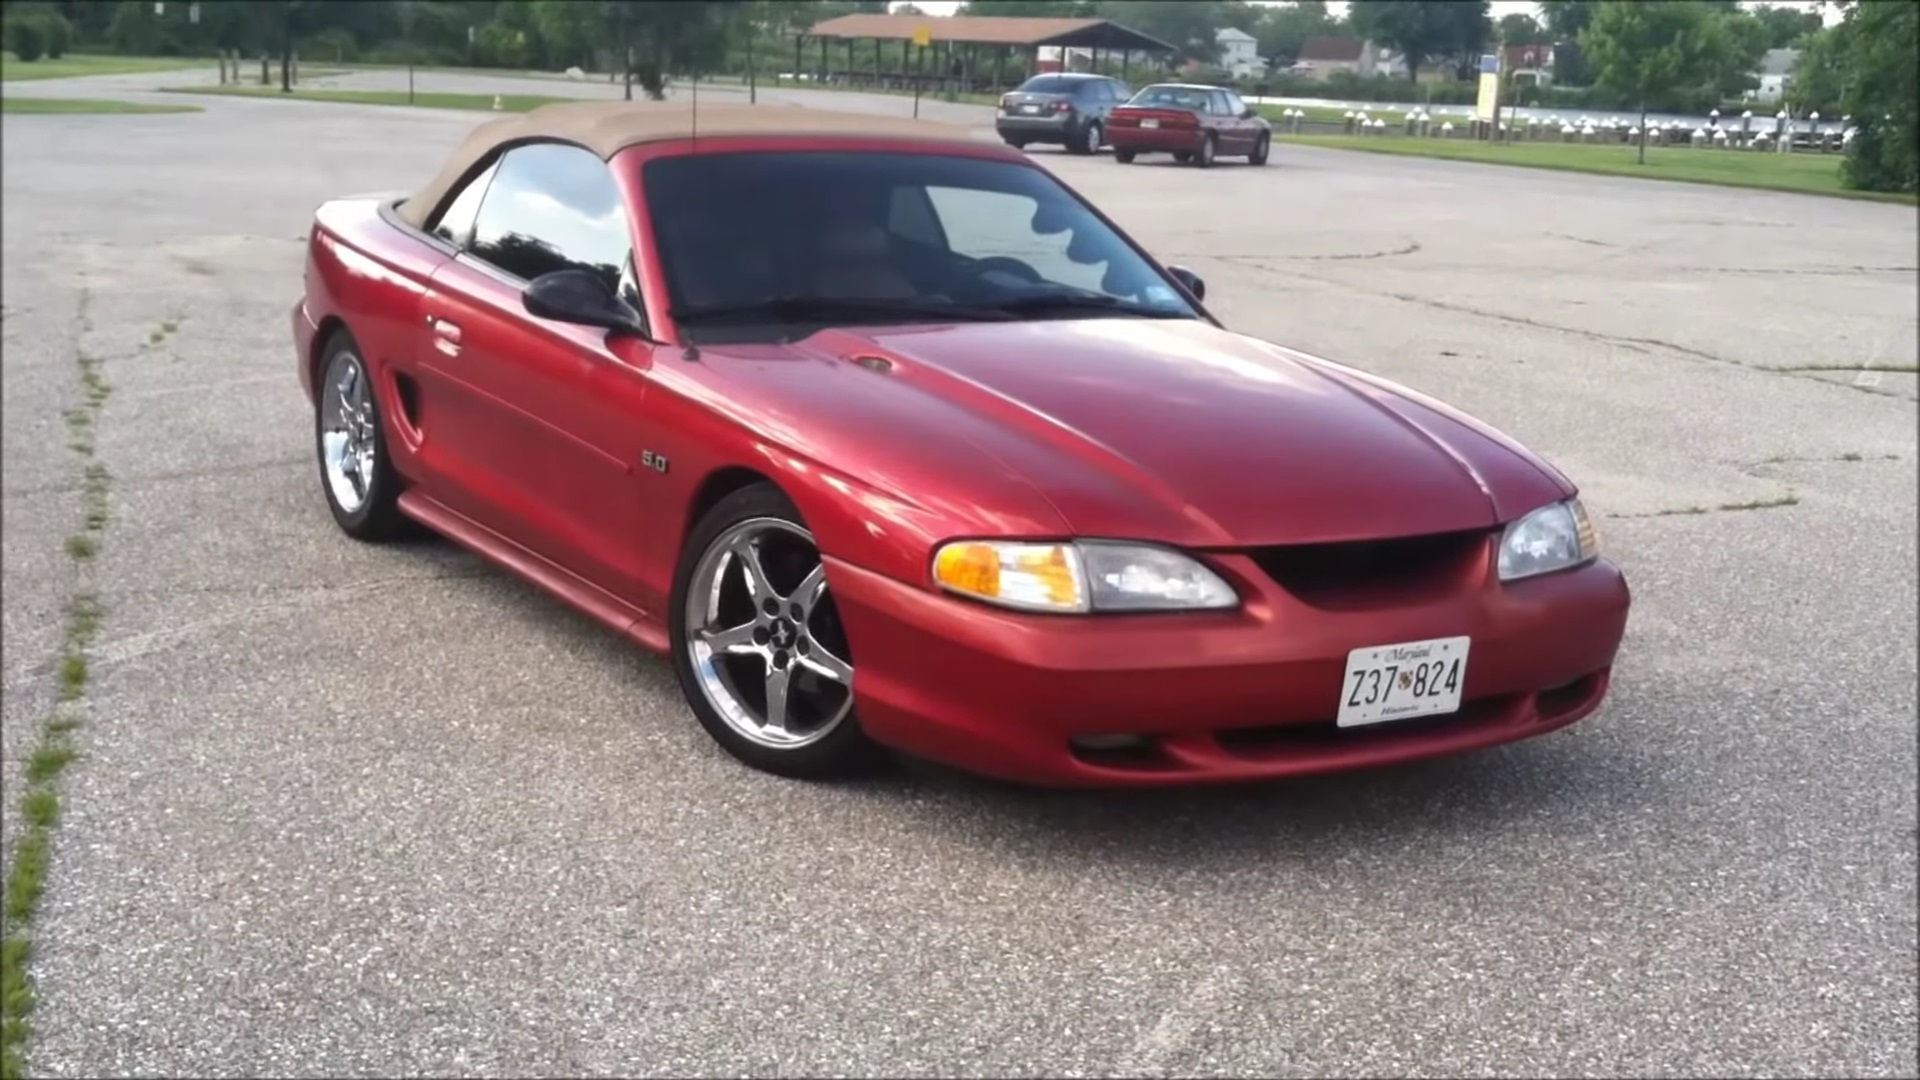 Video: 1994 Ford Mustang GT 5.0 In-Depth Tour